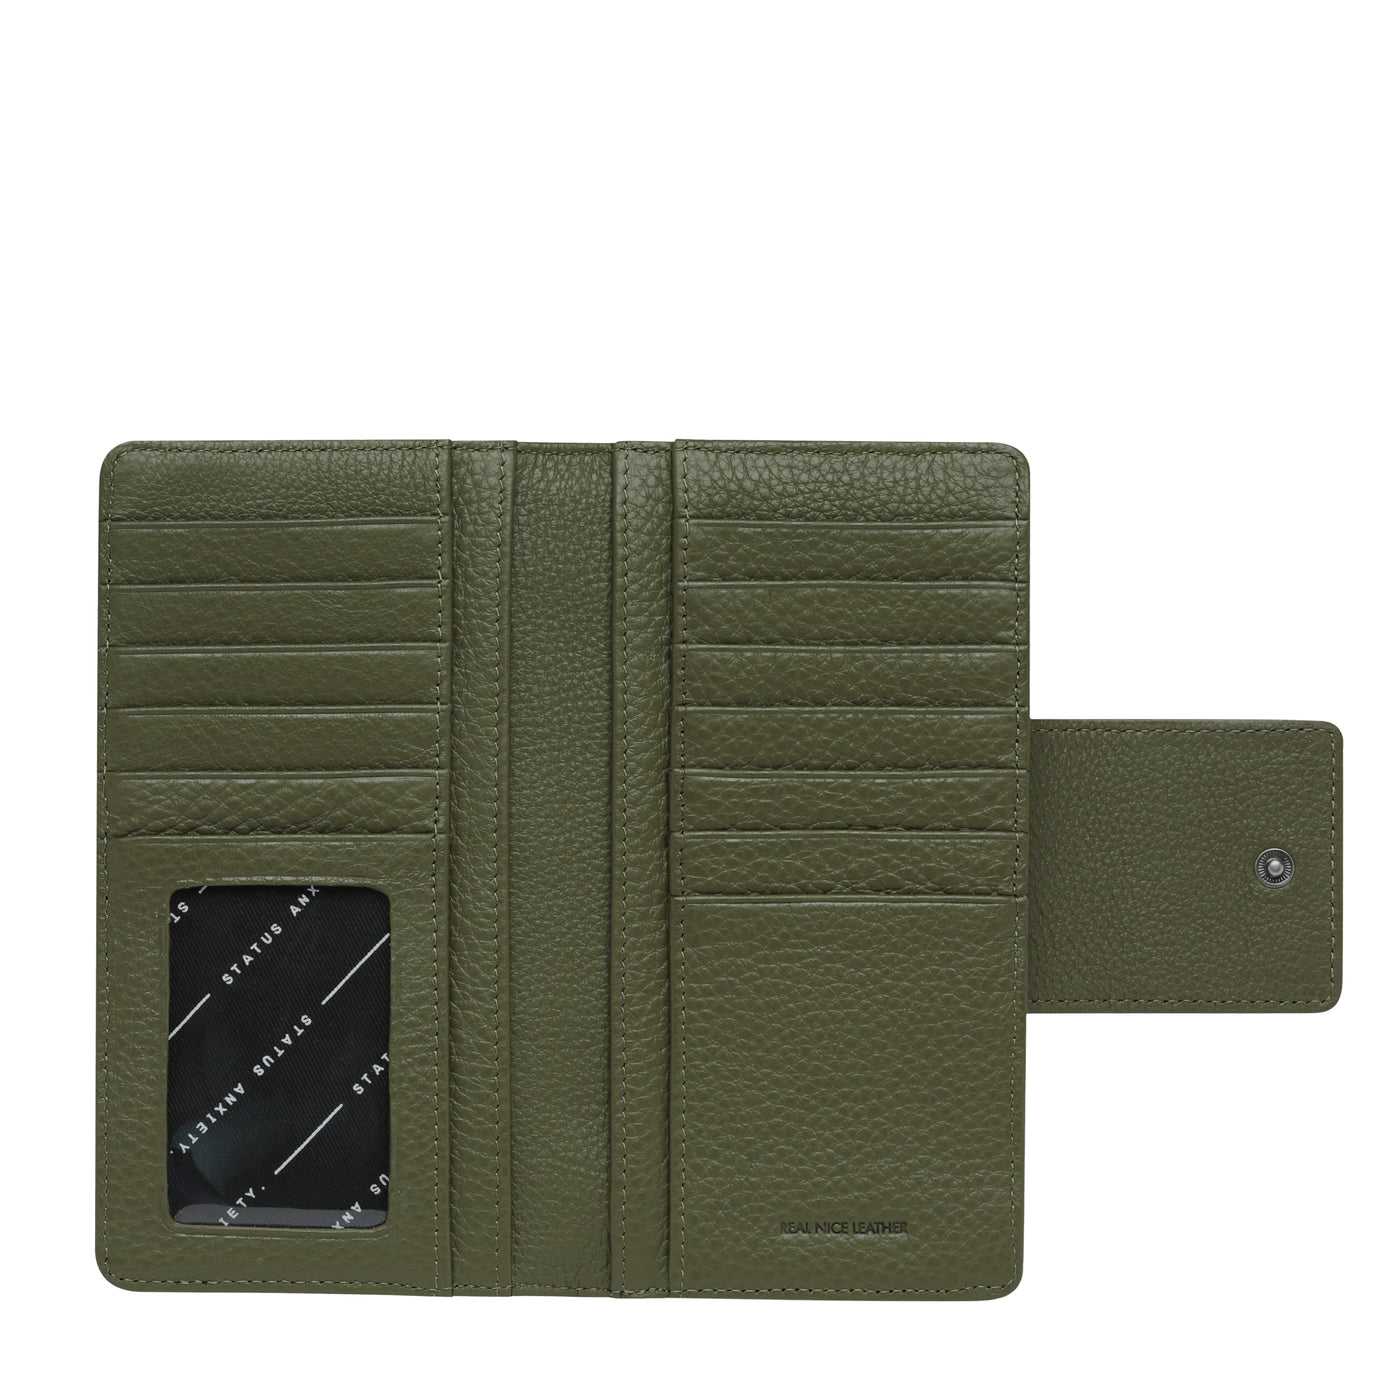 STATUS ANXIETY RUINS WALLET   The Status Anxiety Ruins Wallet is an easy-to-carry wallet, with a slim silhouette and profile, making it perfect for daily use and any outfit.  The Ruins Wallet features a oversized clip clasp to close, with a large external coin pocket, and plenty of internal card slots, and individual bank note spaces. The outside zipper section makes for easy access to your cash without having to open the main section of the wallet.